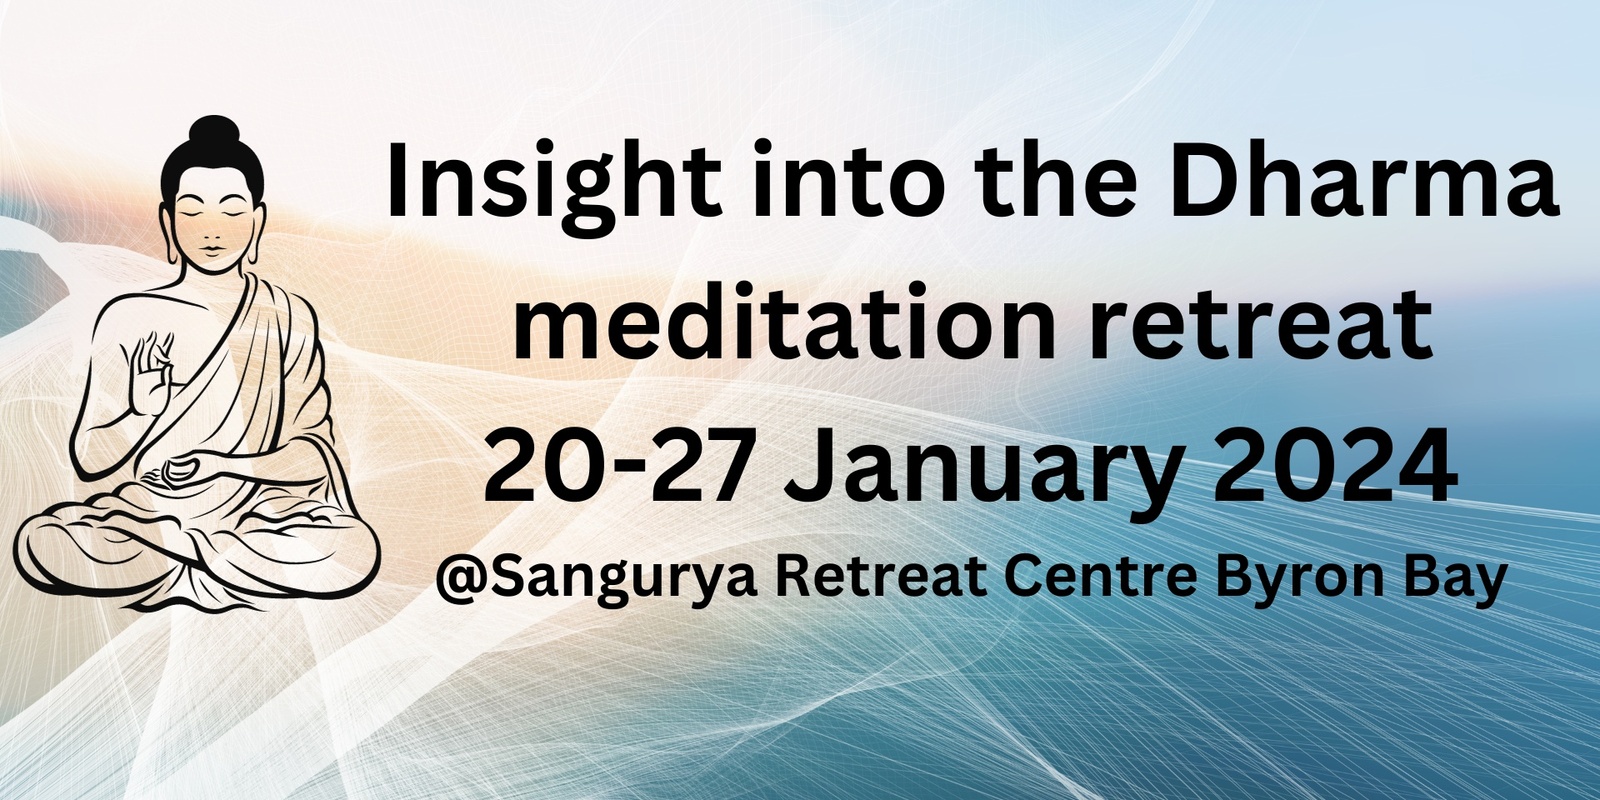 Banner image for Insight into the Dharma meditation retreat